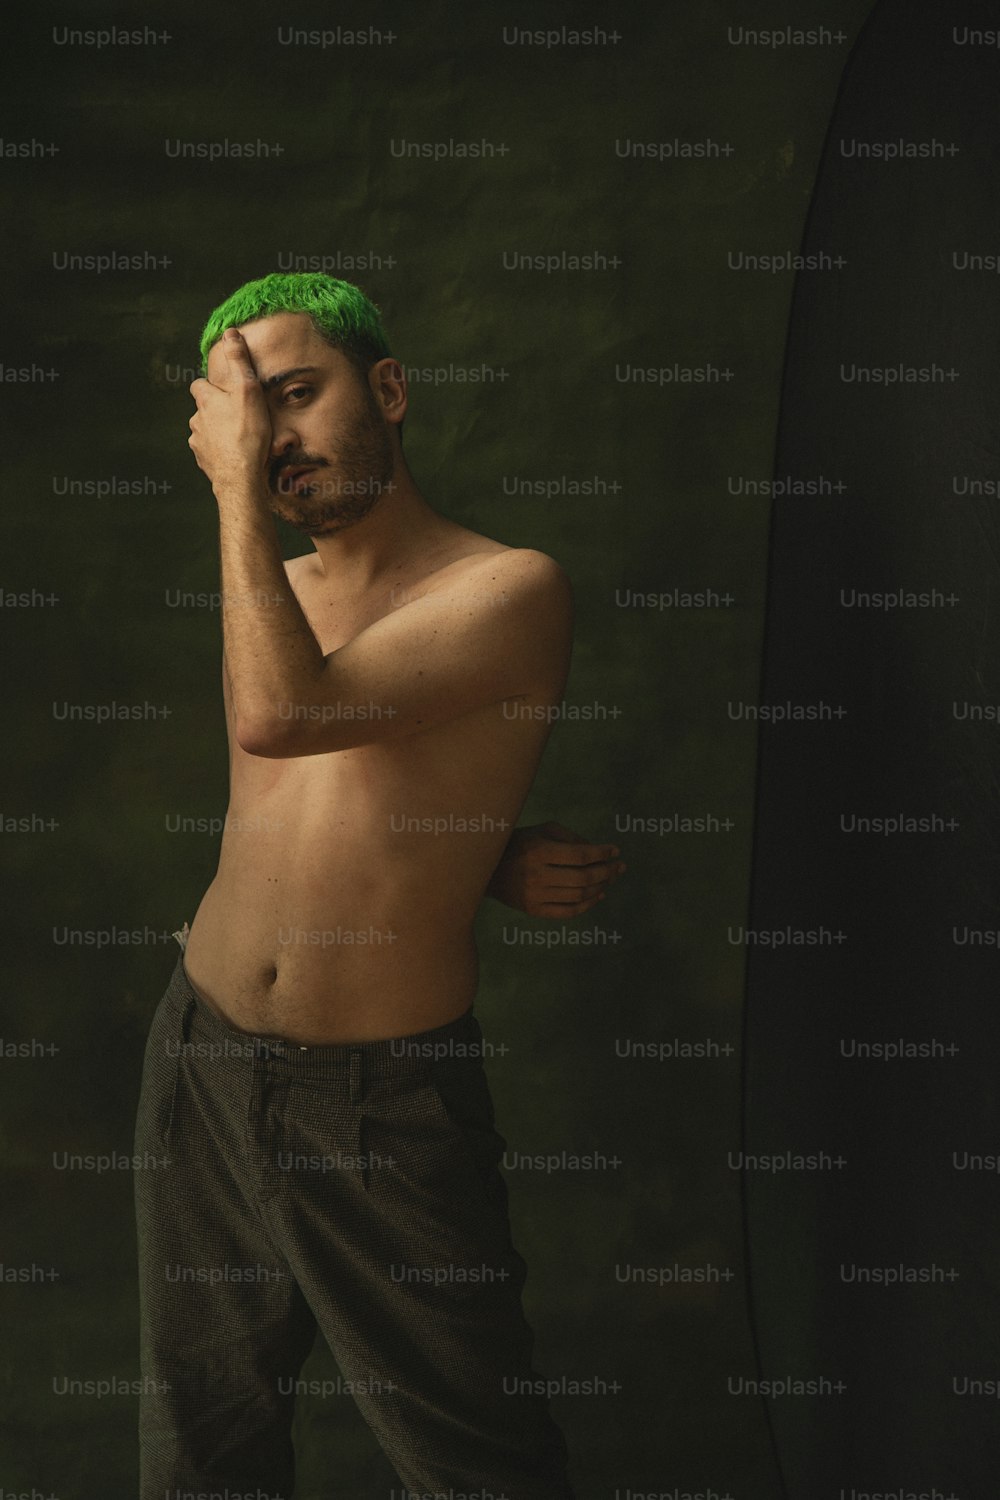 a shirtless man with a green mohawk on his head